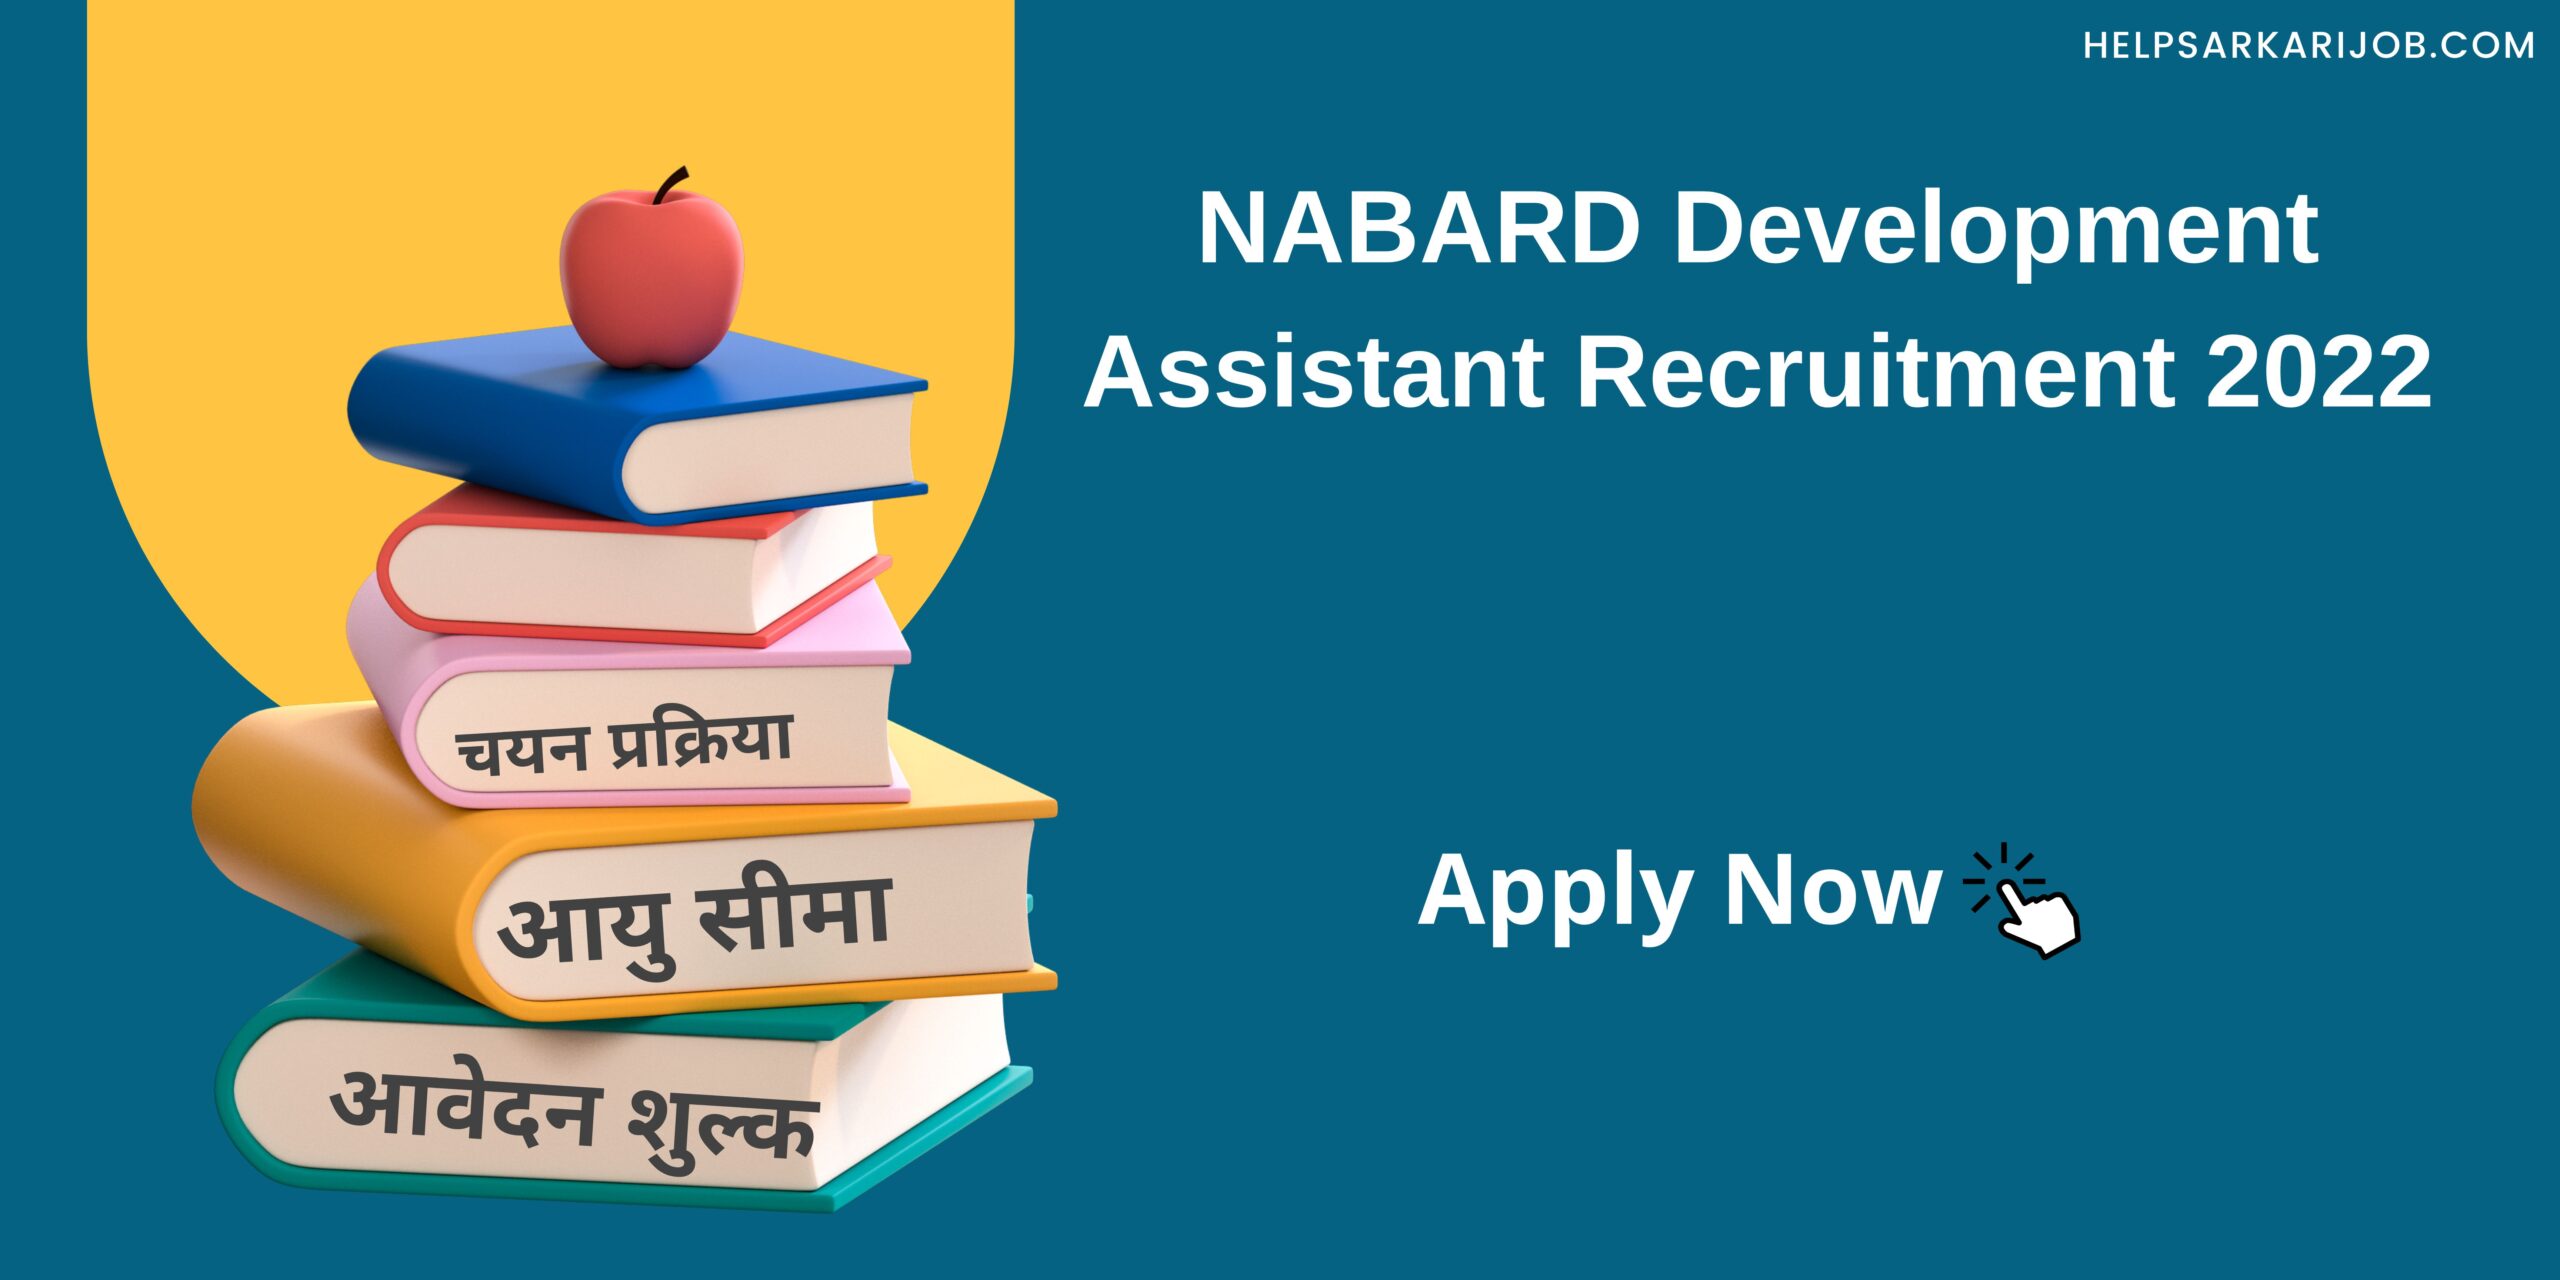 NABARD Development Assistant Recruitment 2022 scaled -